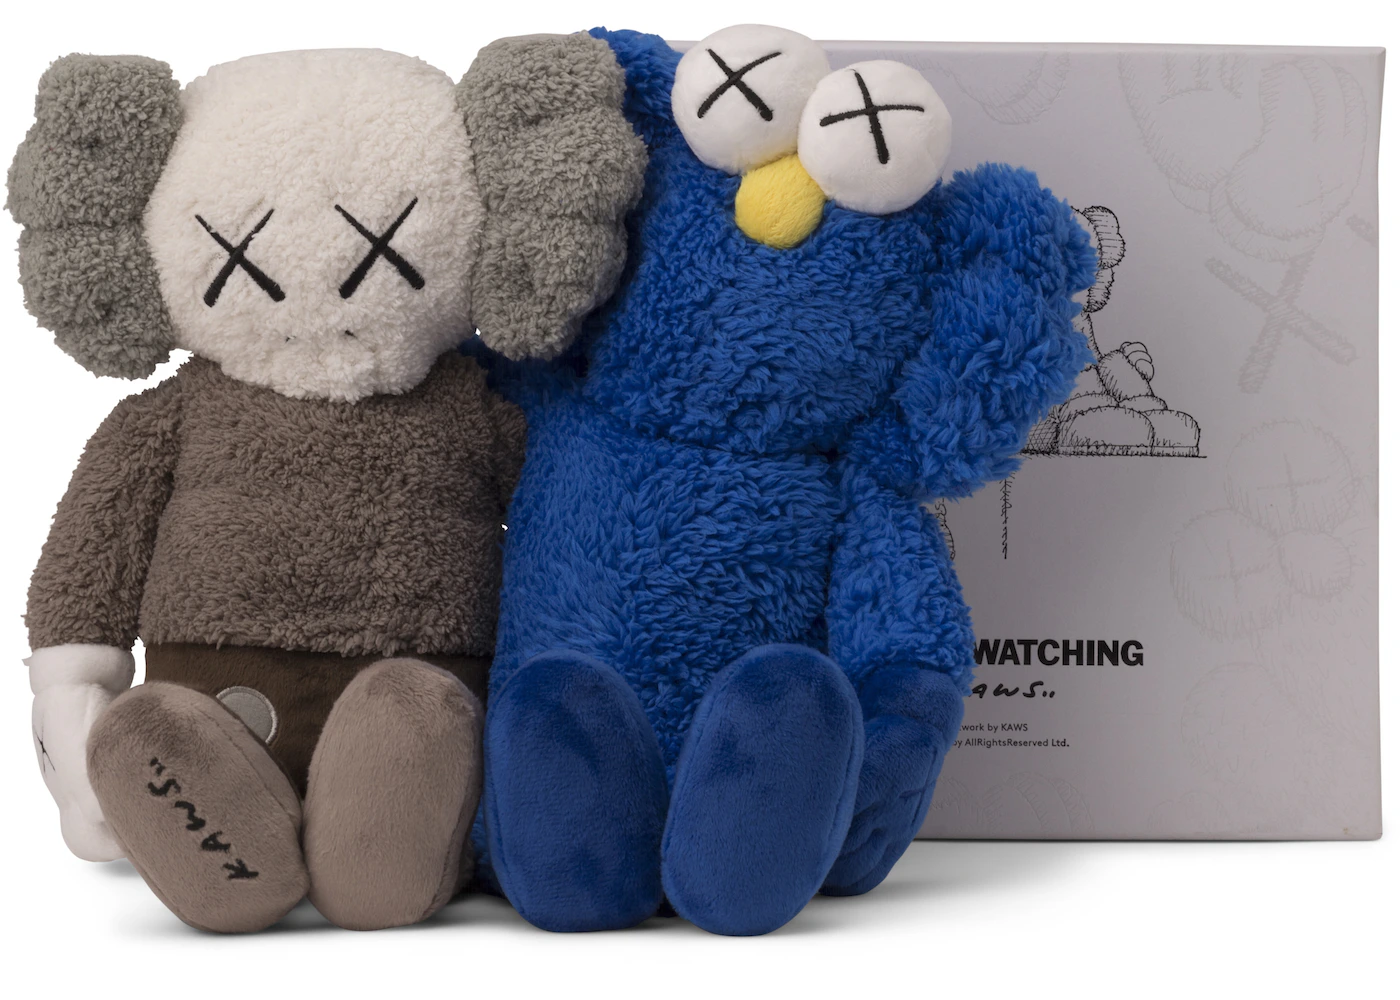 https://images.stockx.com/images/Kaws-Seeing-Watching-Plush-Doll-Grey-Blue.jpg?fit=fill&bg=FFFFFF&w=700&h=500&fm=webp&auto=compress&q=90&dpr=2&trim=color&updated_at=1614786493